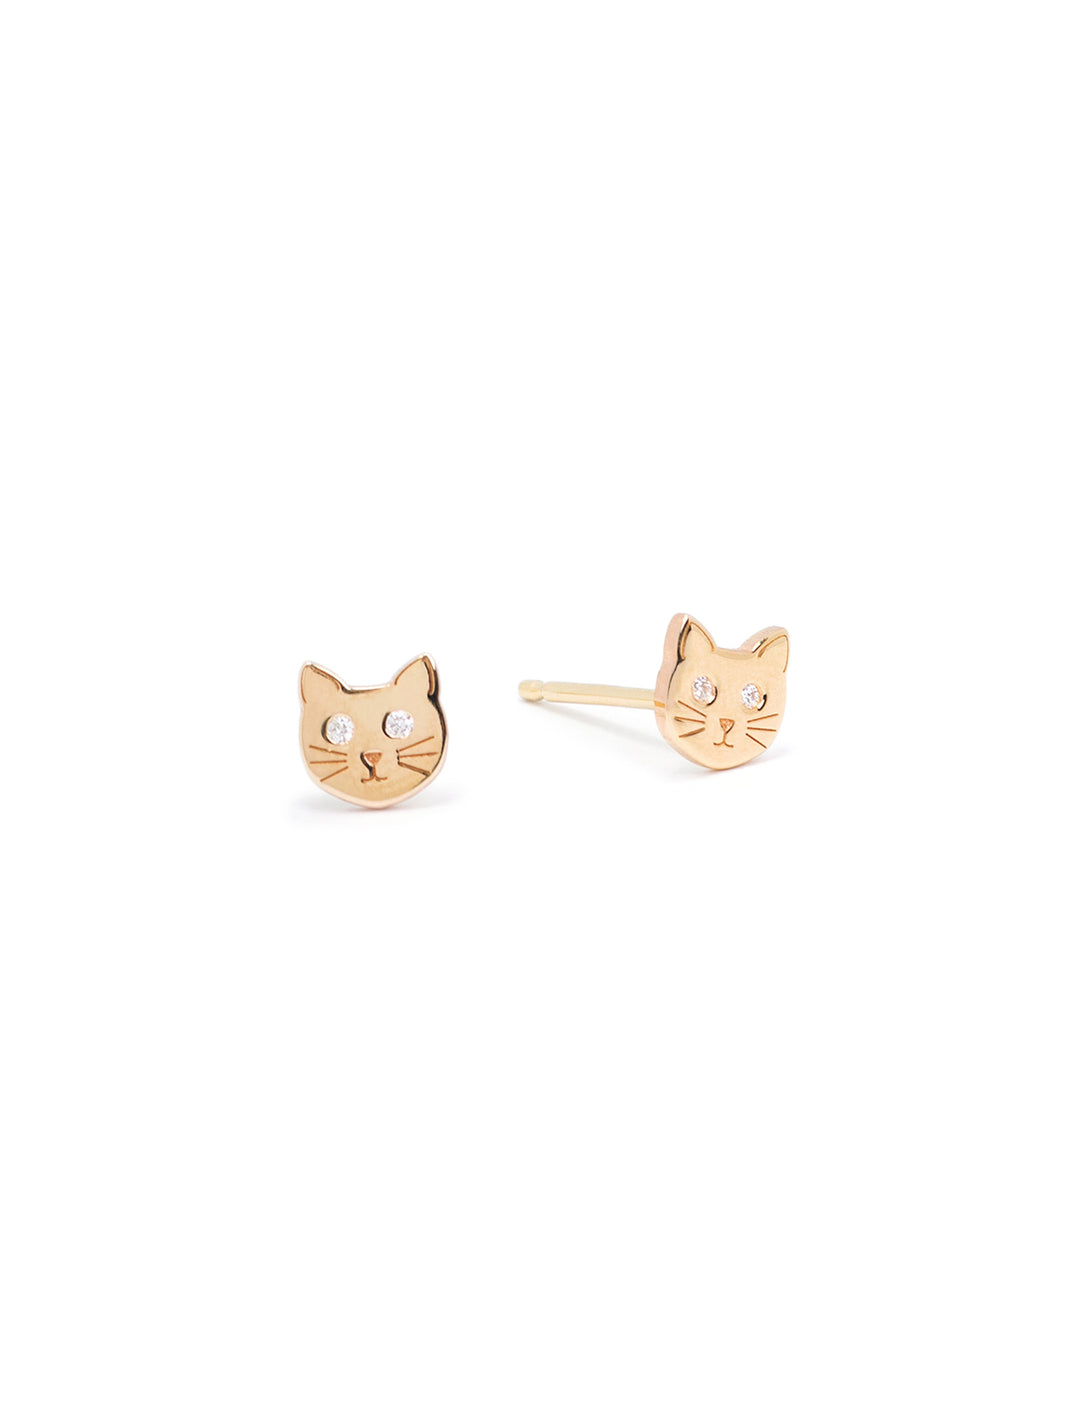 Front view of Zoe Chicco's 14k itty bitty kitty studs with diamonds.